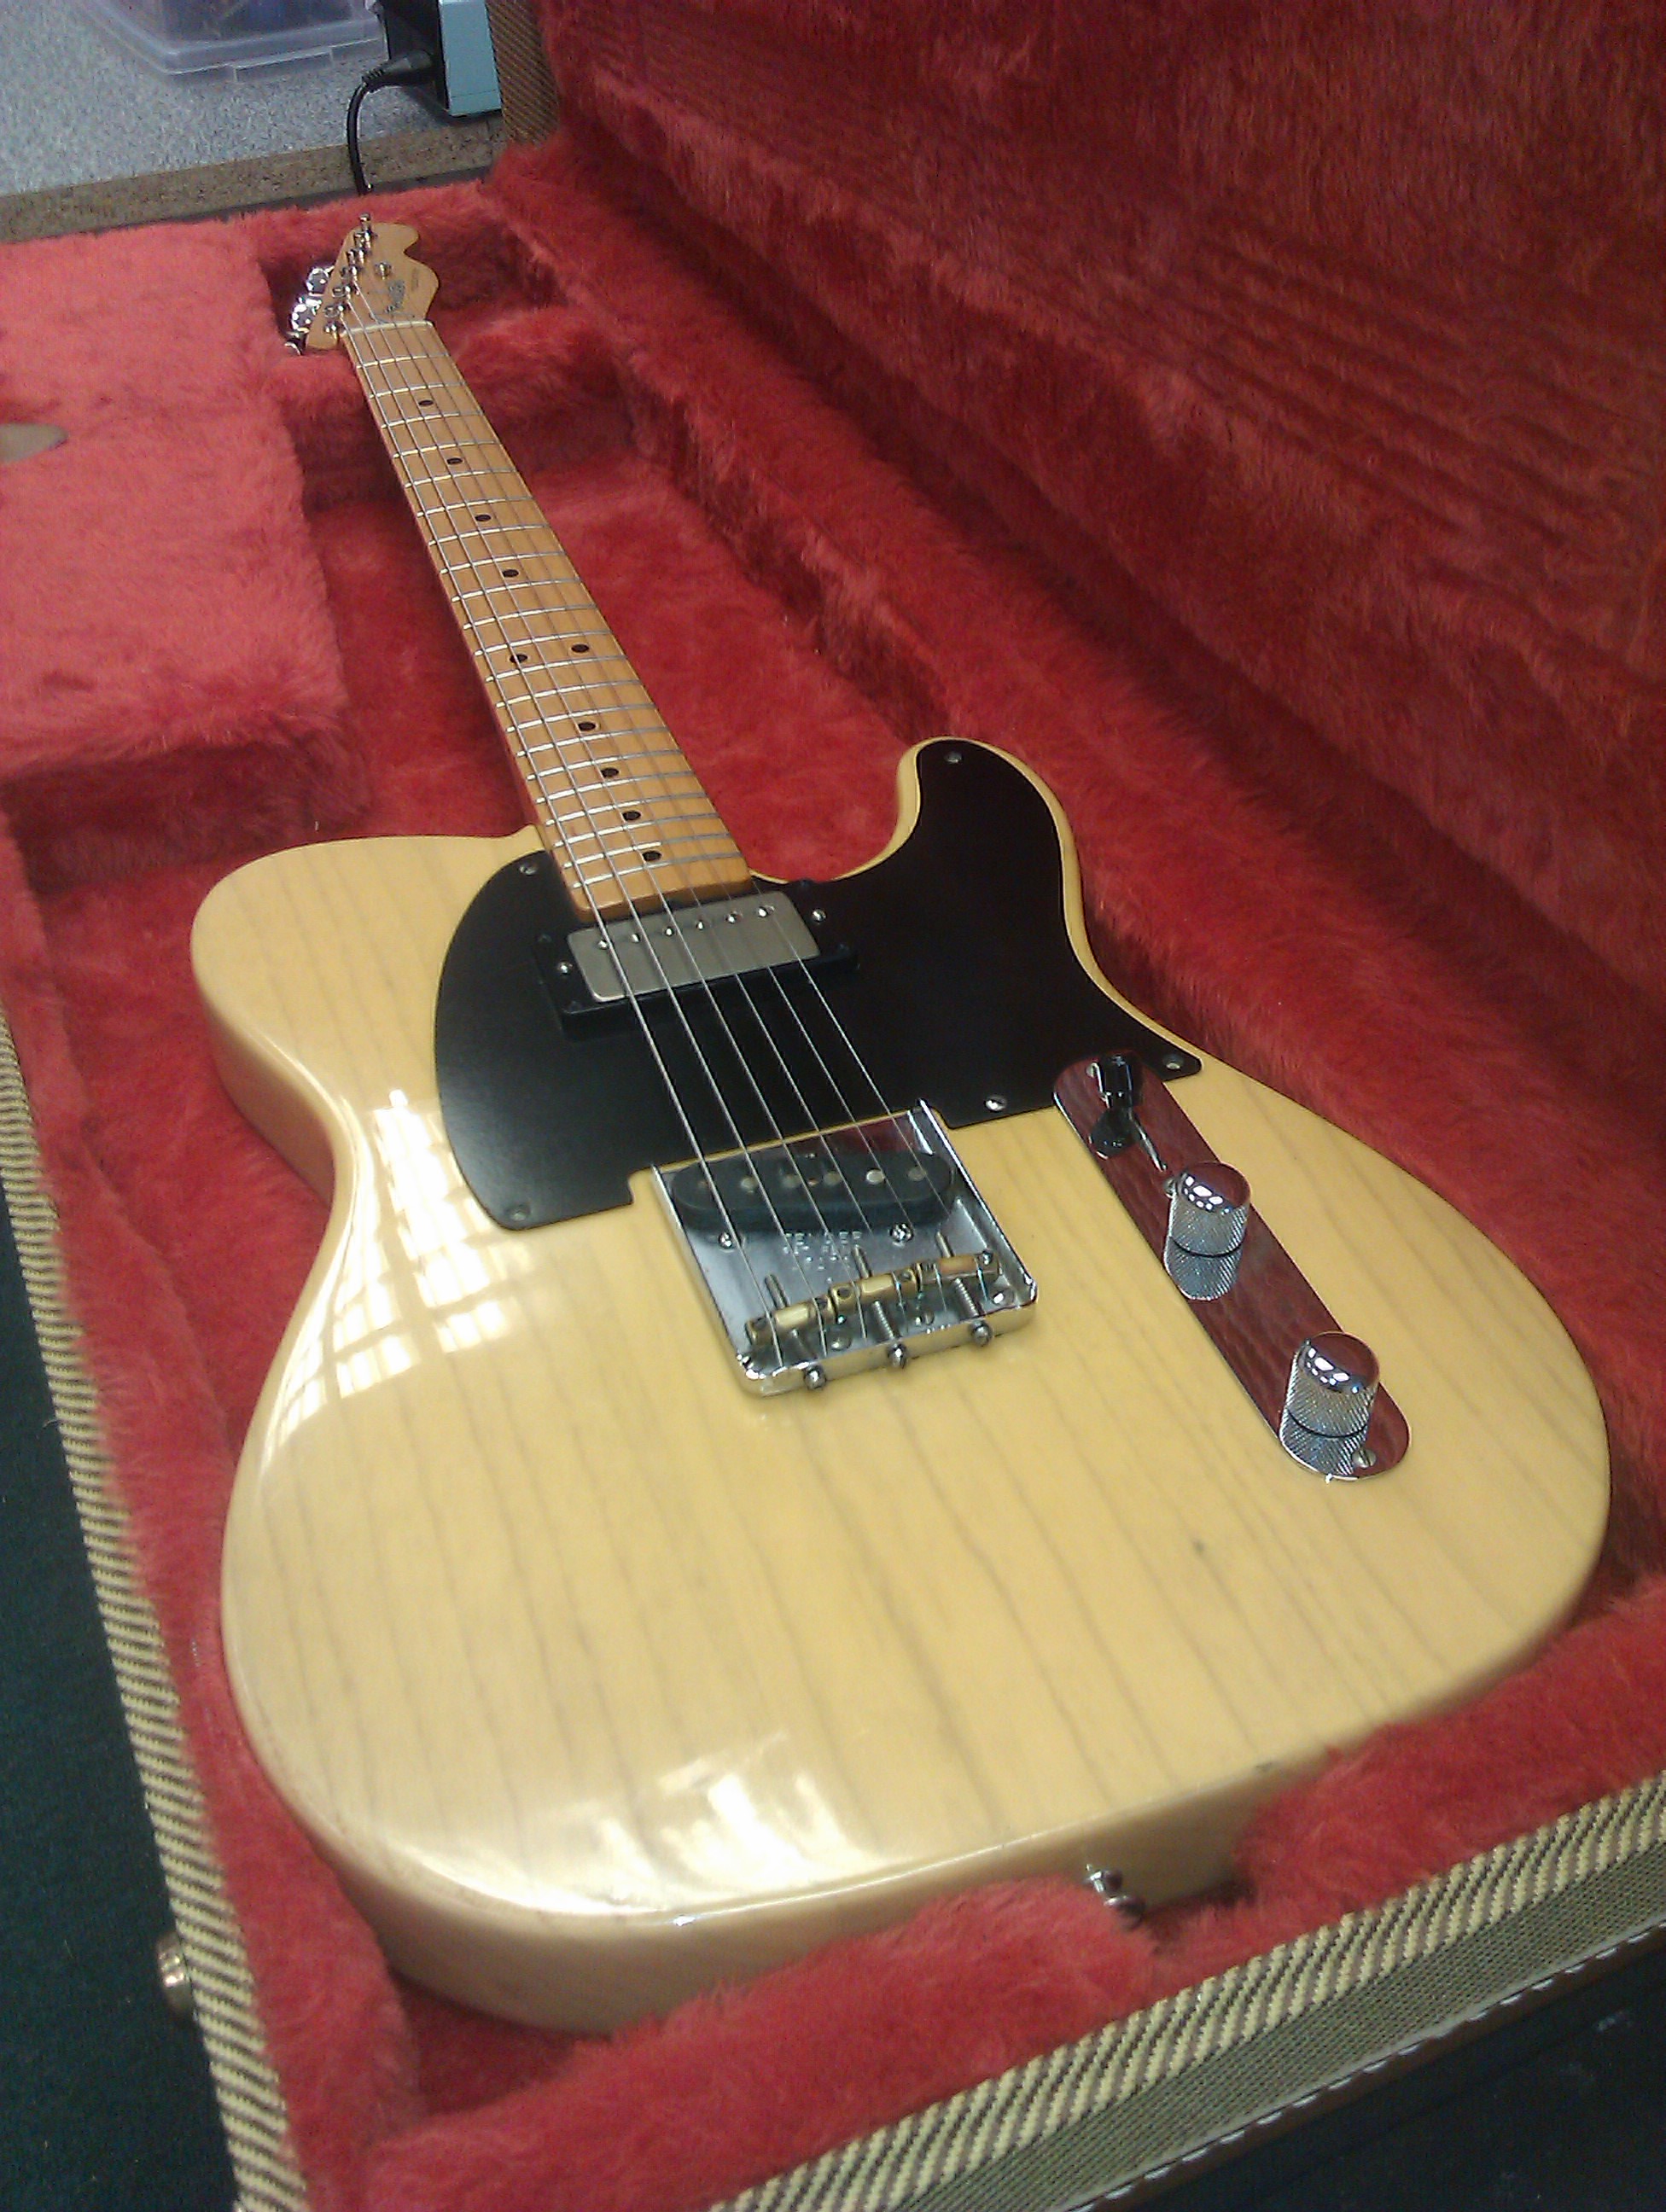 The Bare Knuckles' Mule pickup makes a great upgrade for the Tele.